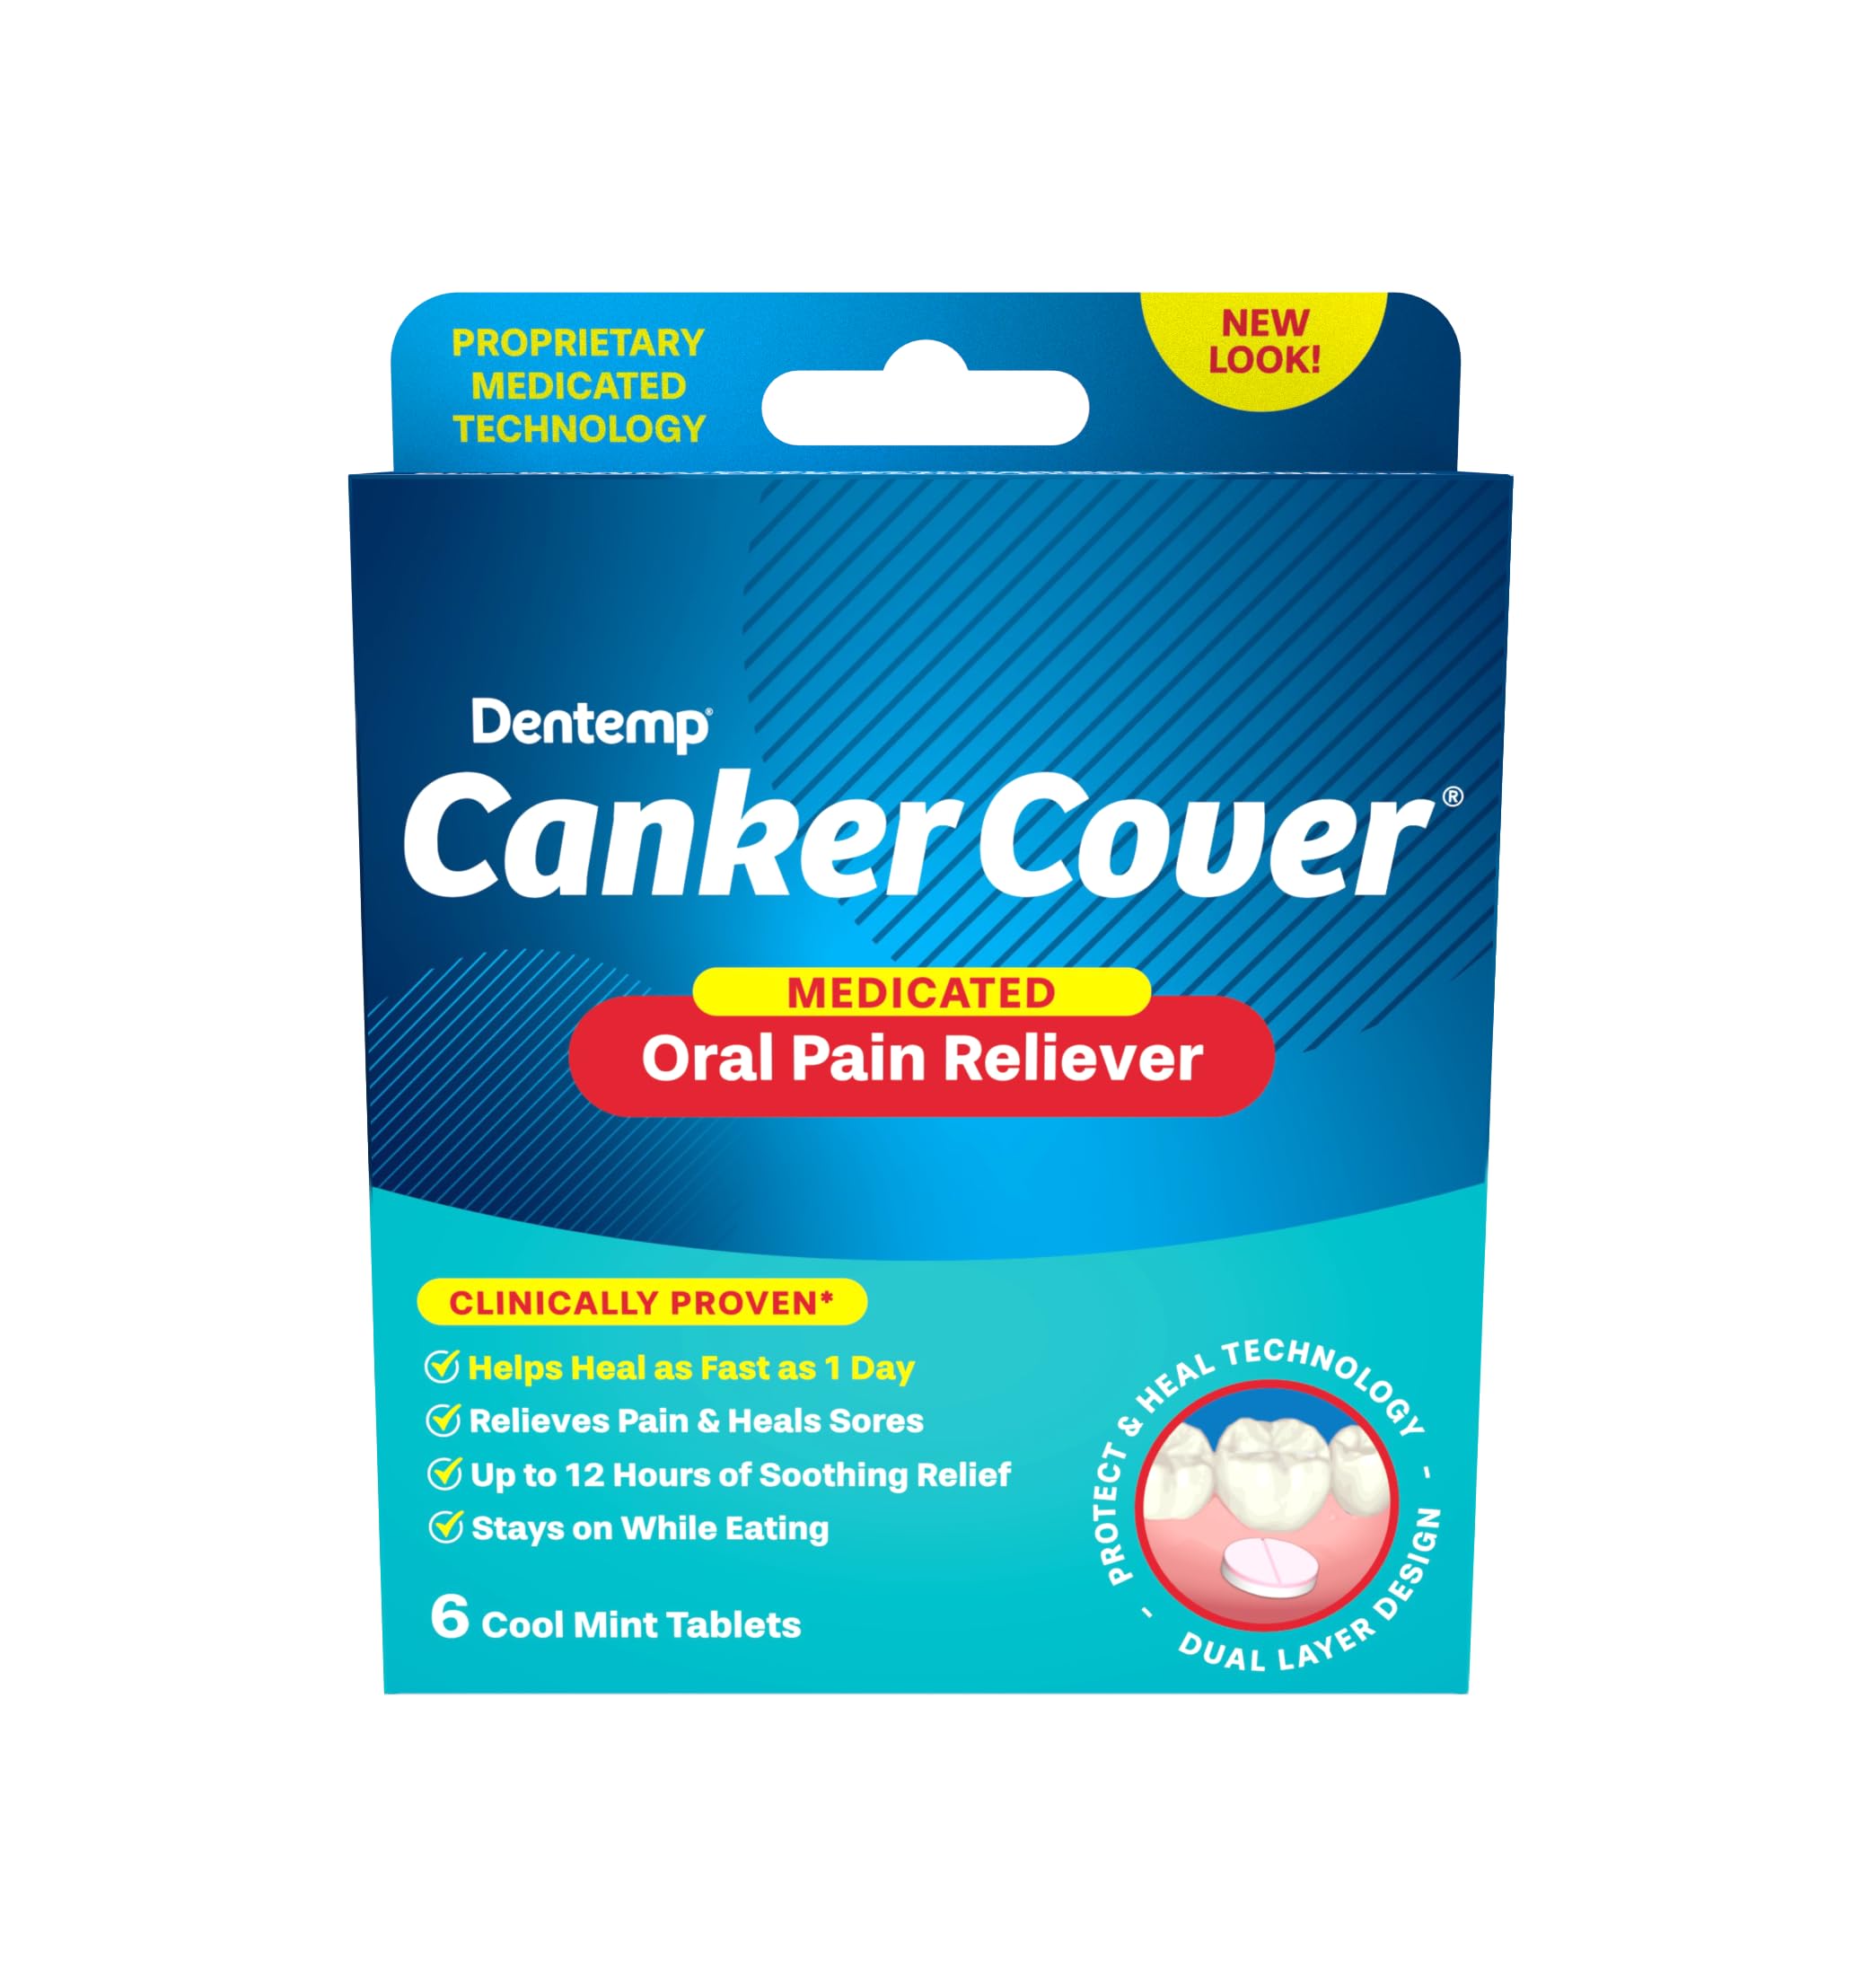 Dentemp Canker Cover - Canker Sore Medicine Pain Reliever (6 Counts) - Canker Sore Treatment to Relieve Canker Pain, Mouth Sores & Mouth Irritation - Fast Acting Relief